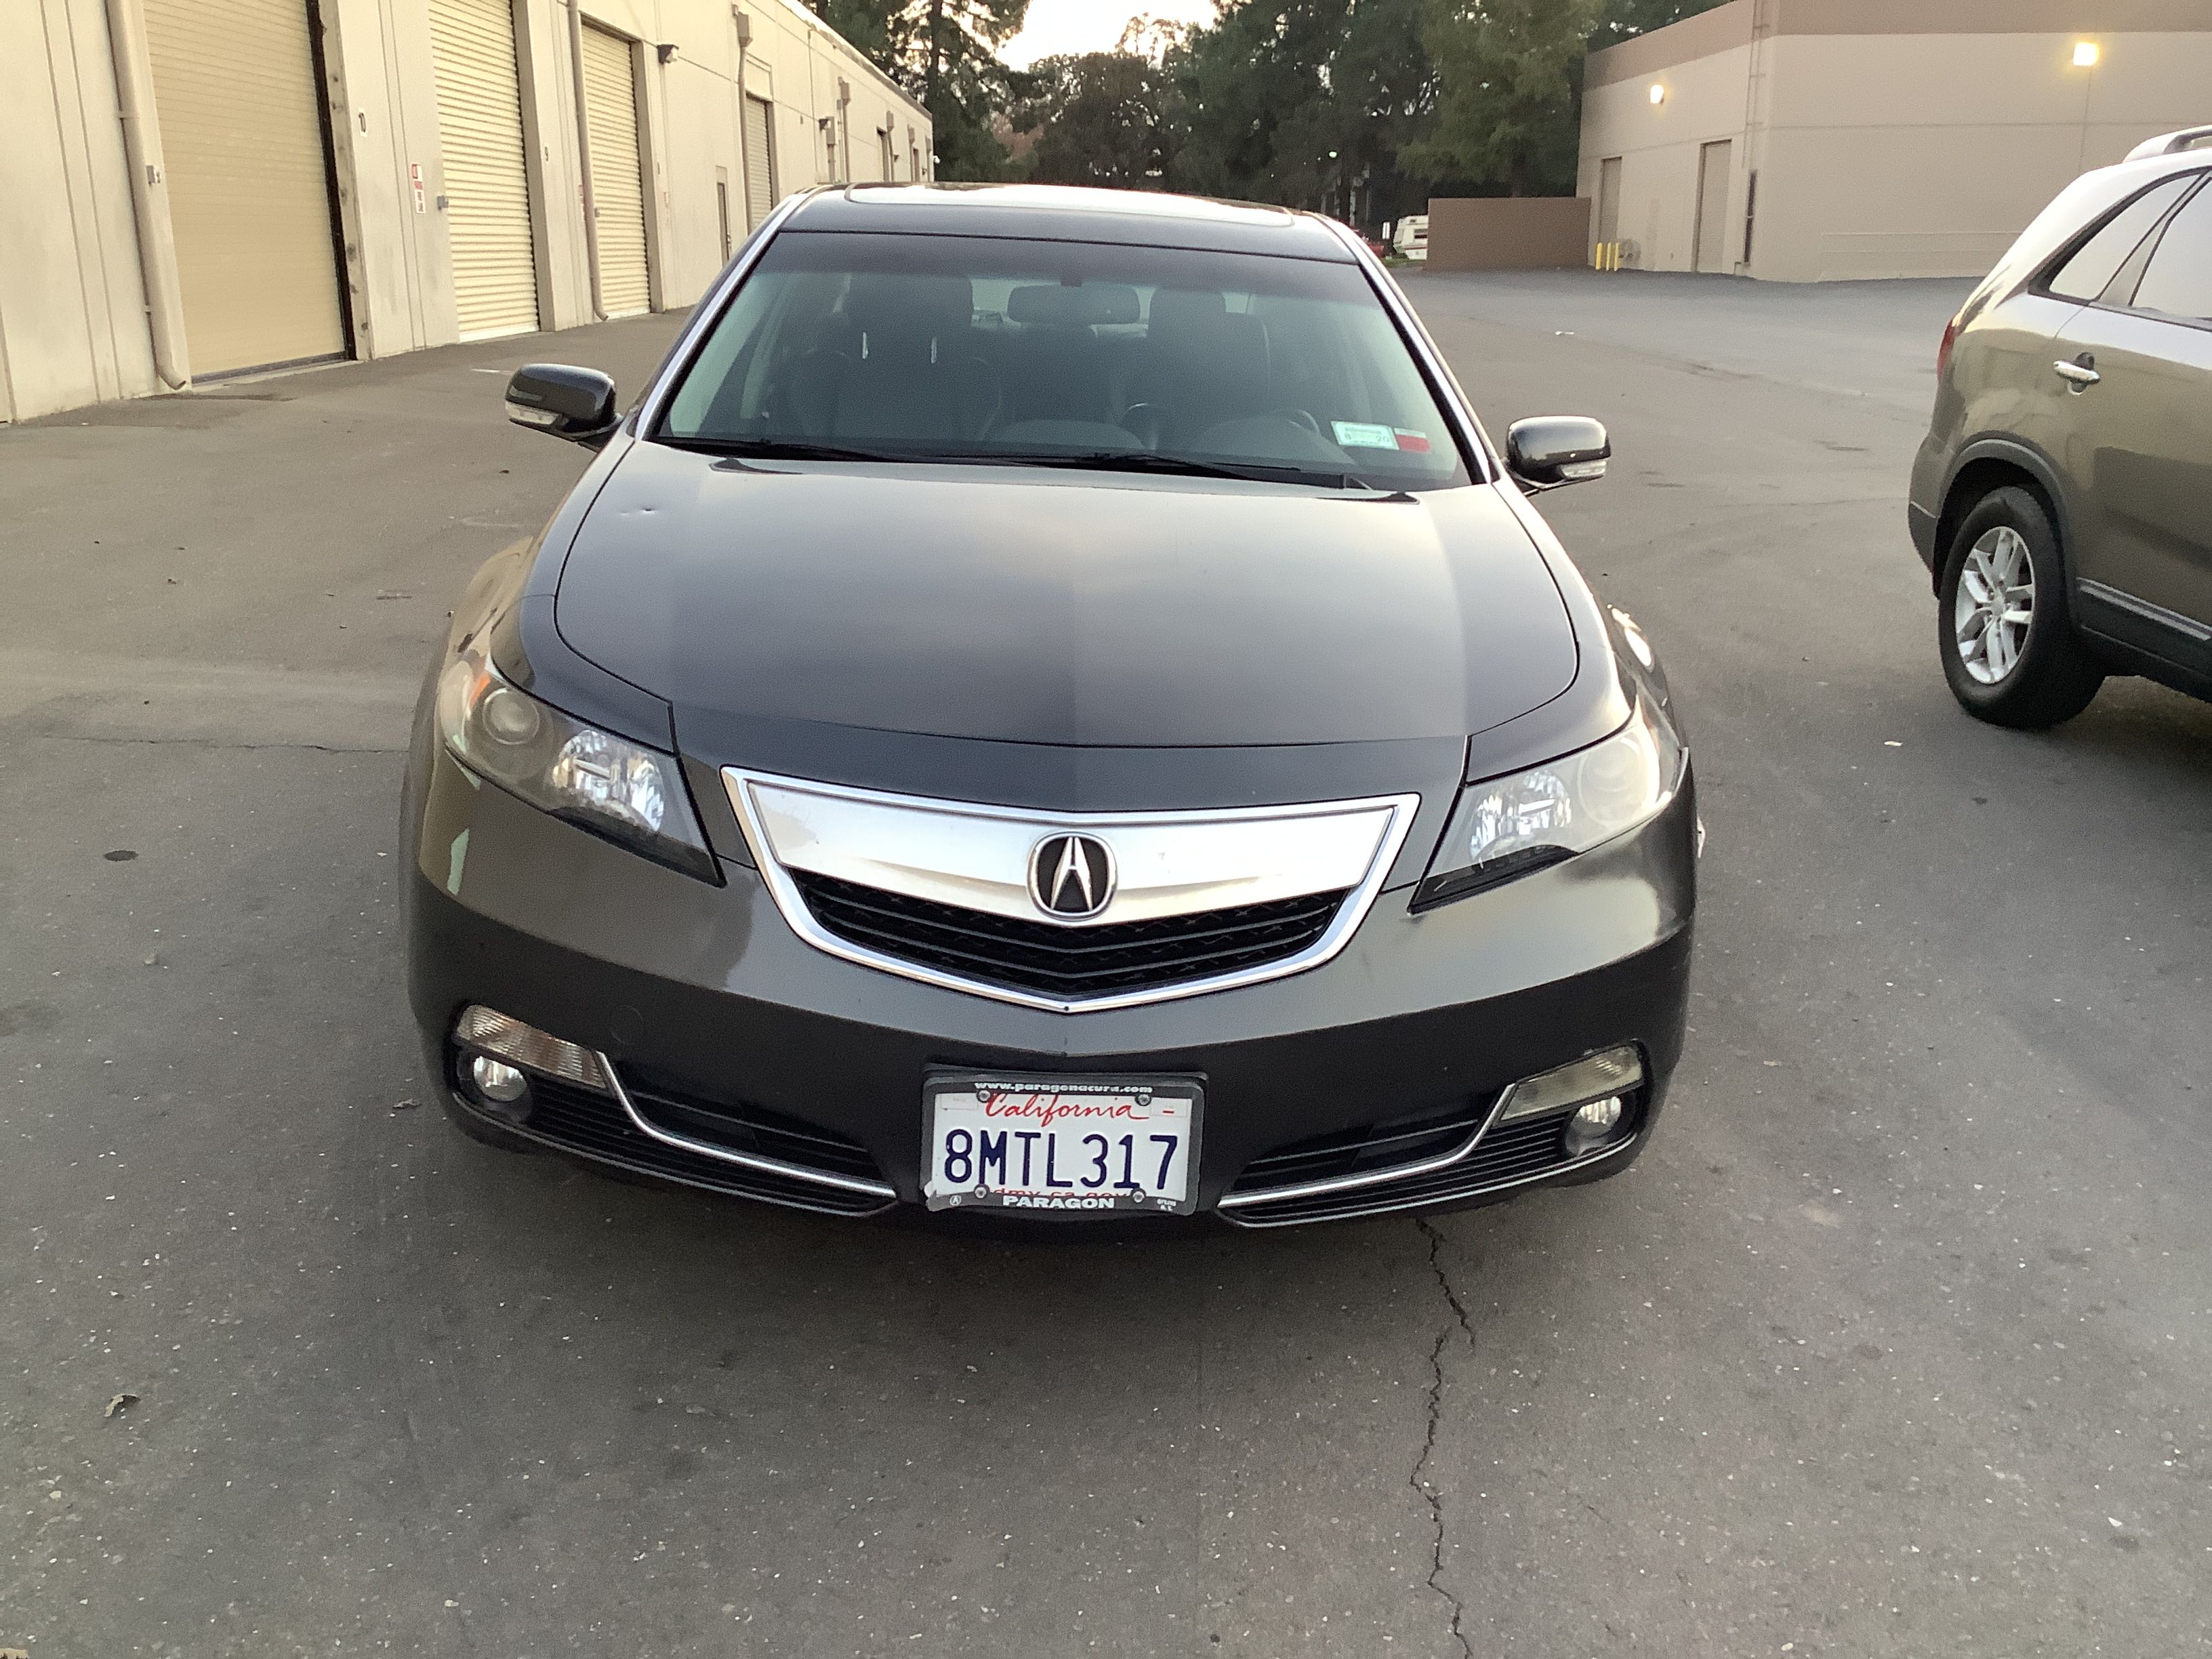 Used 2012 Gray Acura TL for $16,950